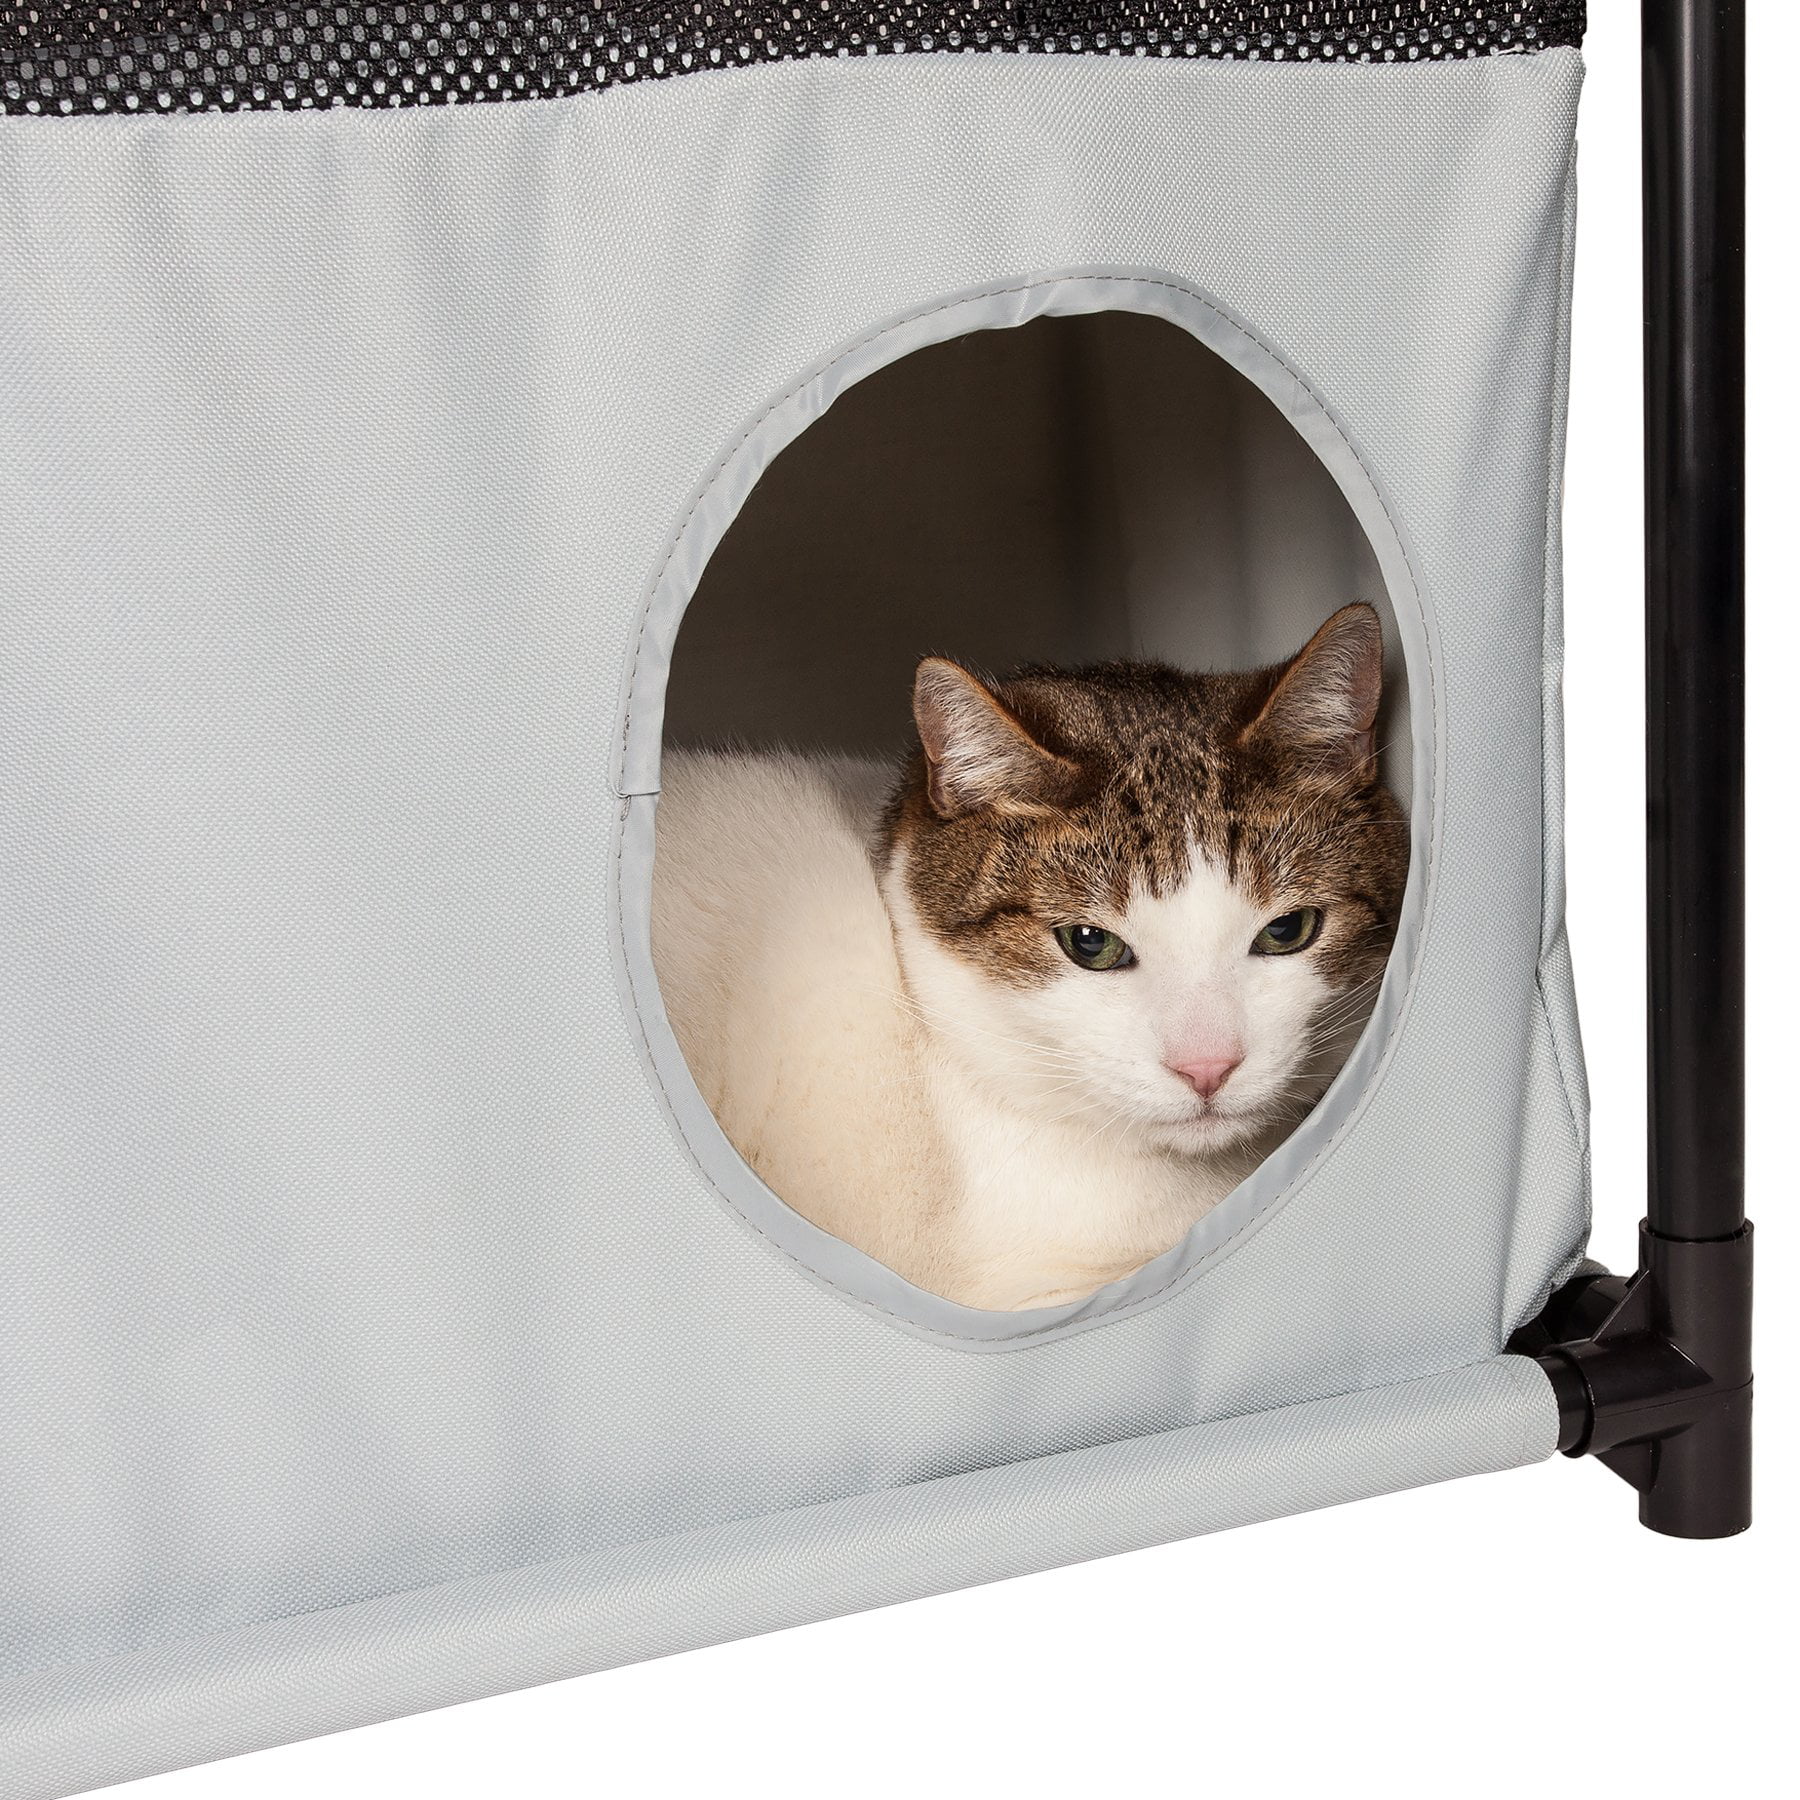 Pet Life Kitty-Square Obstacle Soft Folding Sturdy Play-Active Travel Collapsible Travel Pet Cat House Furniture 